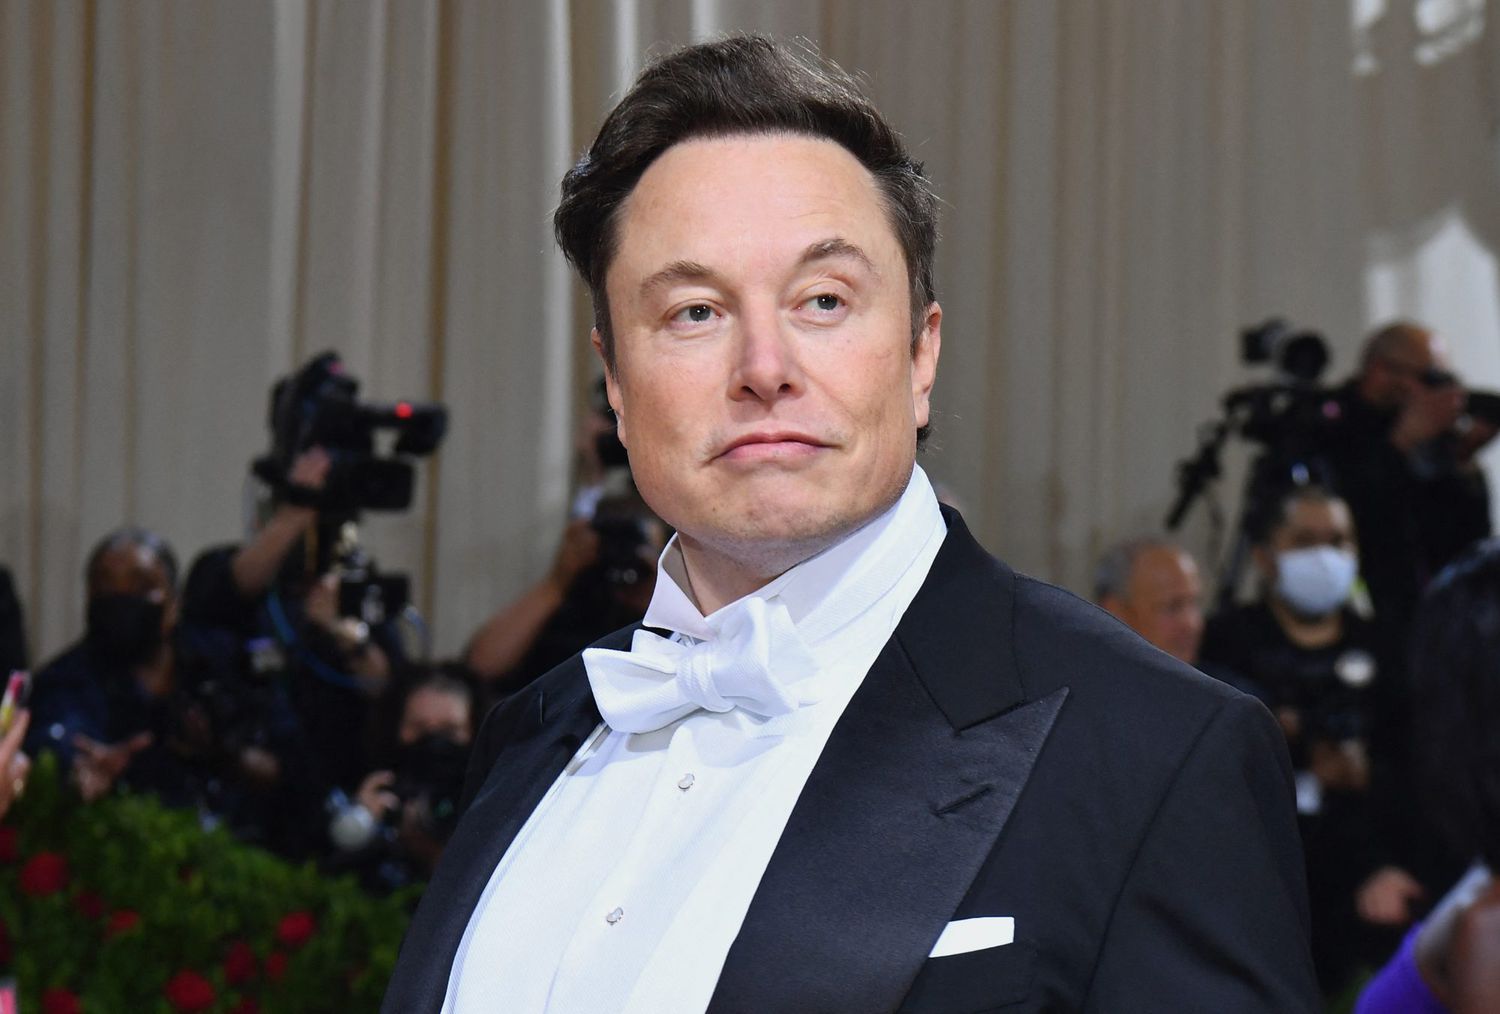 Elon Musk arrives for the 2022 Met Gala at the Metropolitan Museum of Art on May 2, 2022, Em Nova Iórque. - The Gala raises money for the Metropolitan Museum of Art's Costume Institute. The Gala's 2022 theme is "In America: An Anthology of Fashion". (Photo by Angela Weiss / AFP) (Photo by ANGELA WEISS/AFP via Getty Images)